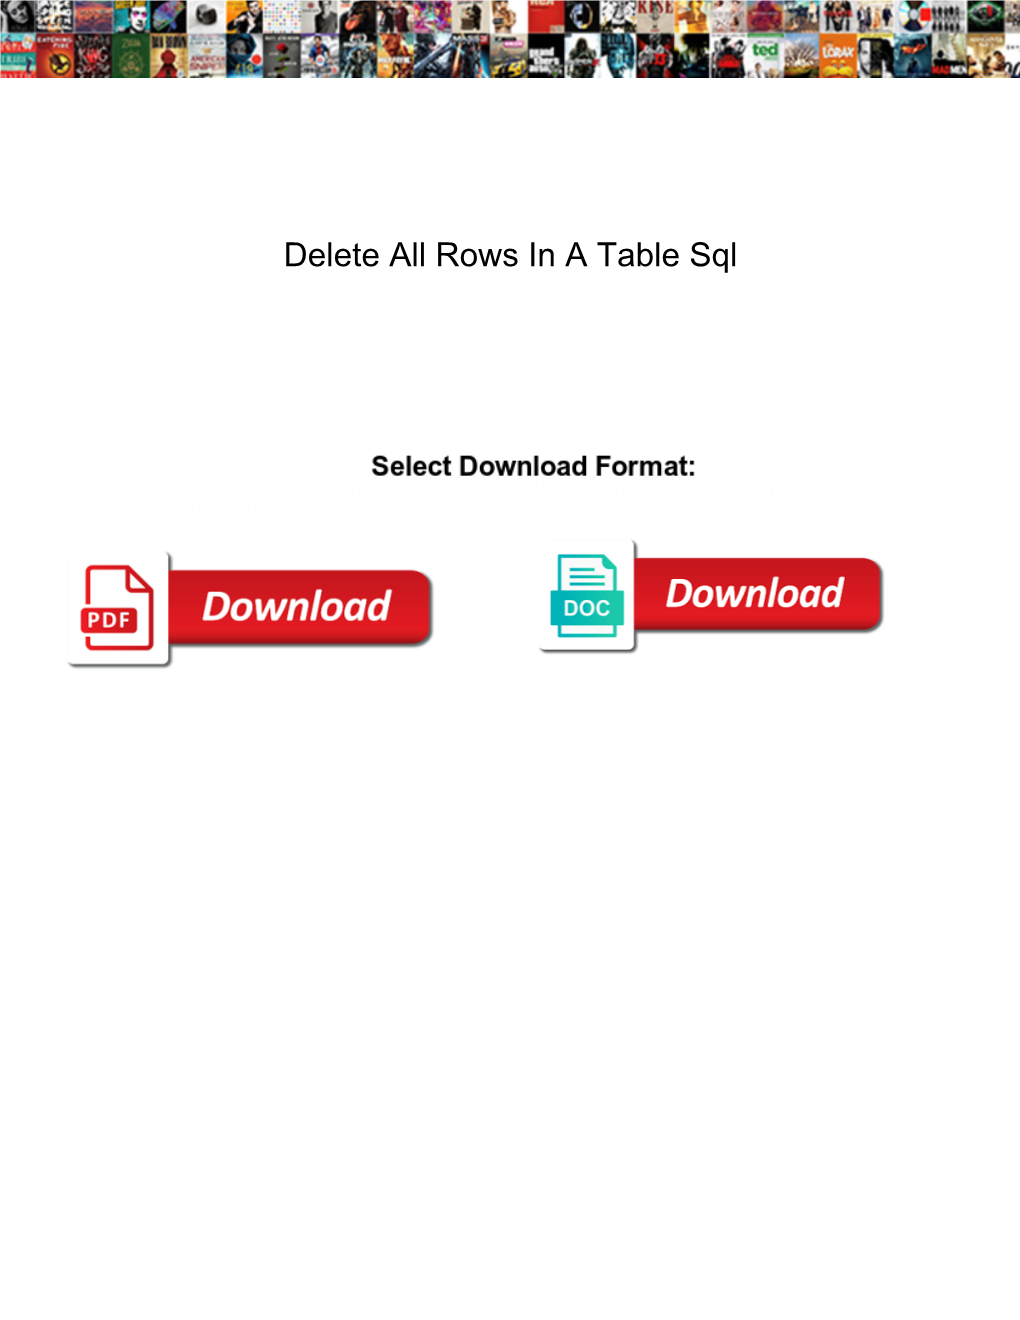 Delete All Rows in a Table Sql